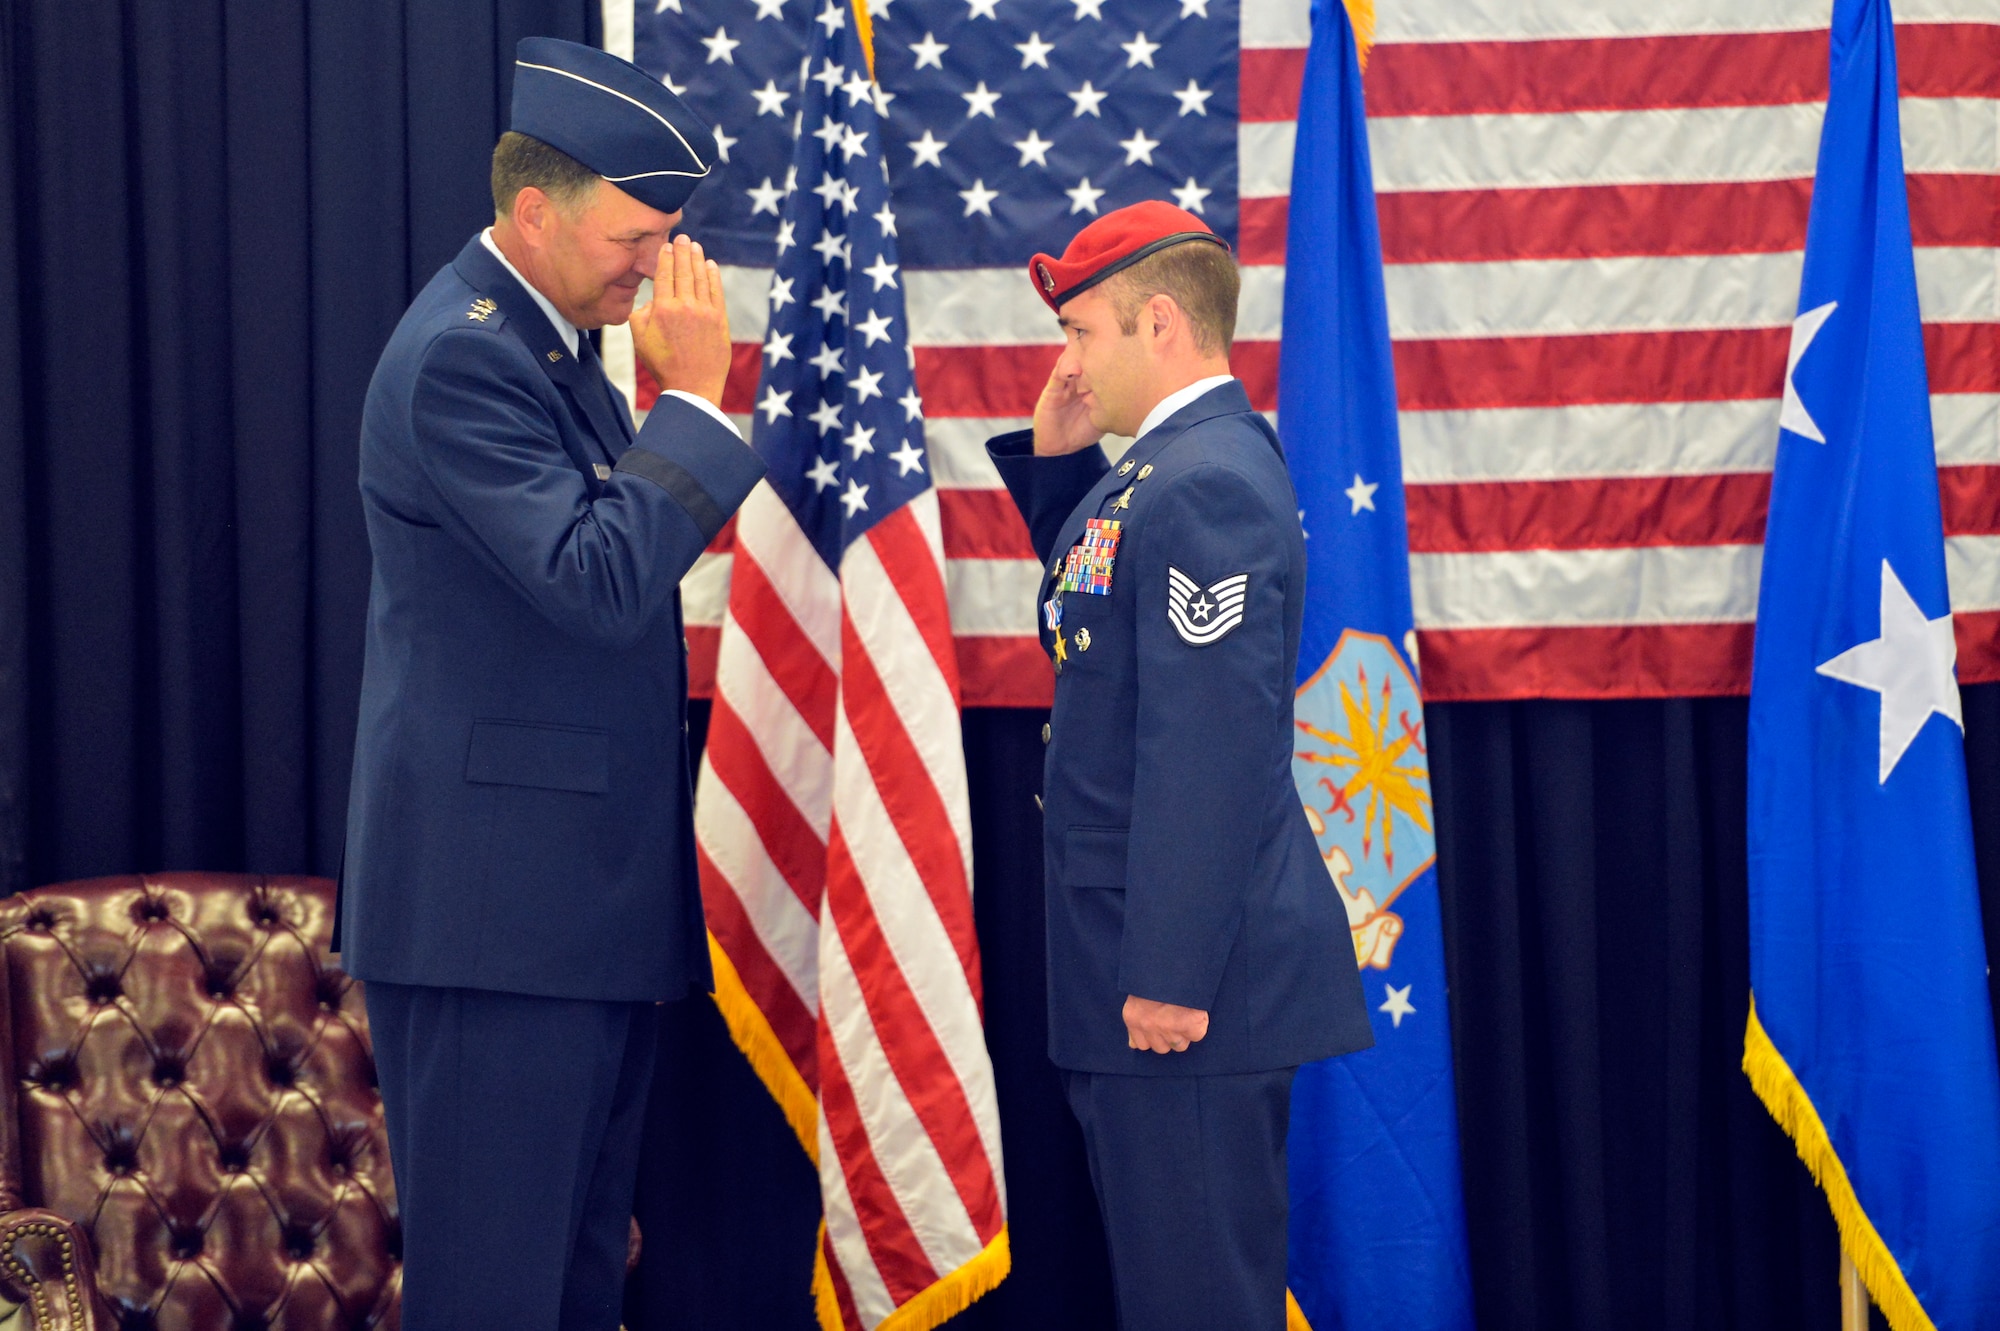 Tech. Sgt. Matthew McKenna salutes Lt. Gen. Bradley Heithold Aug. 18, 2014, after being awarded the Silver Star during the 22nd Special Tactics Squadron awards ceremony at Joint Base Lewis-McChord, Wash. McKenna was the fourth 22nd STS member to earn the medal for operations conducted in Iraq and Afghanistan McKenna is a 22nd STS combat controller and Heithold is the the Air Force Special Operations Command commander. (U.S. Air Force photo/Staff Sgt. Russ Jackson)